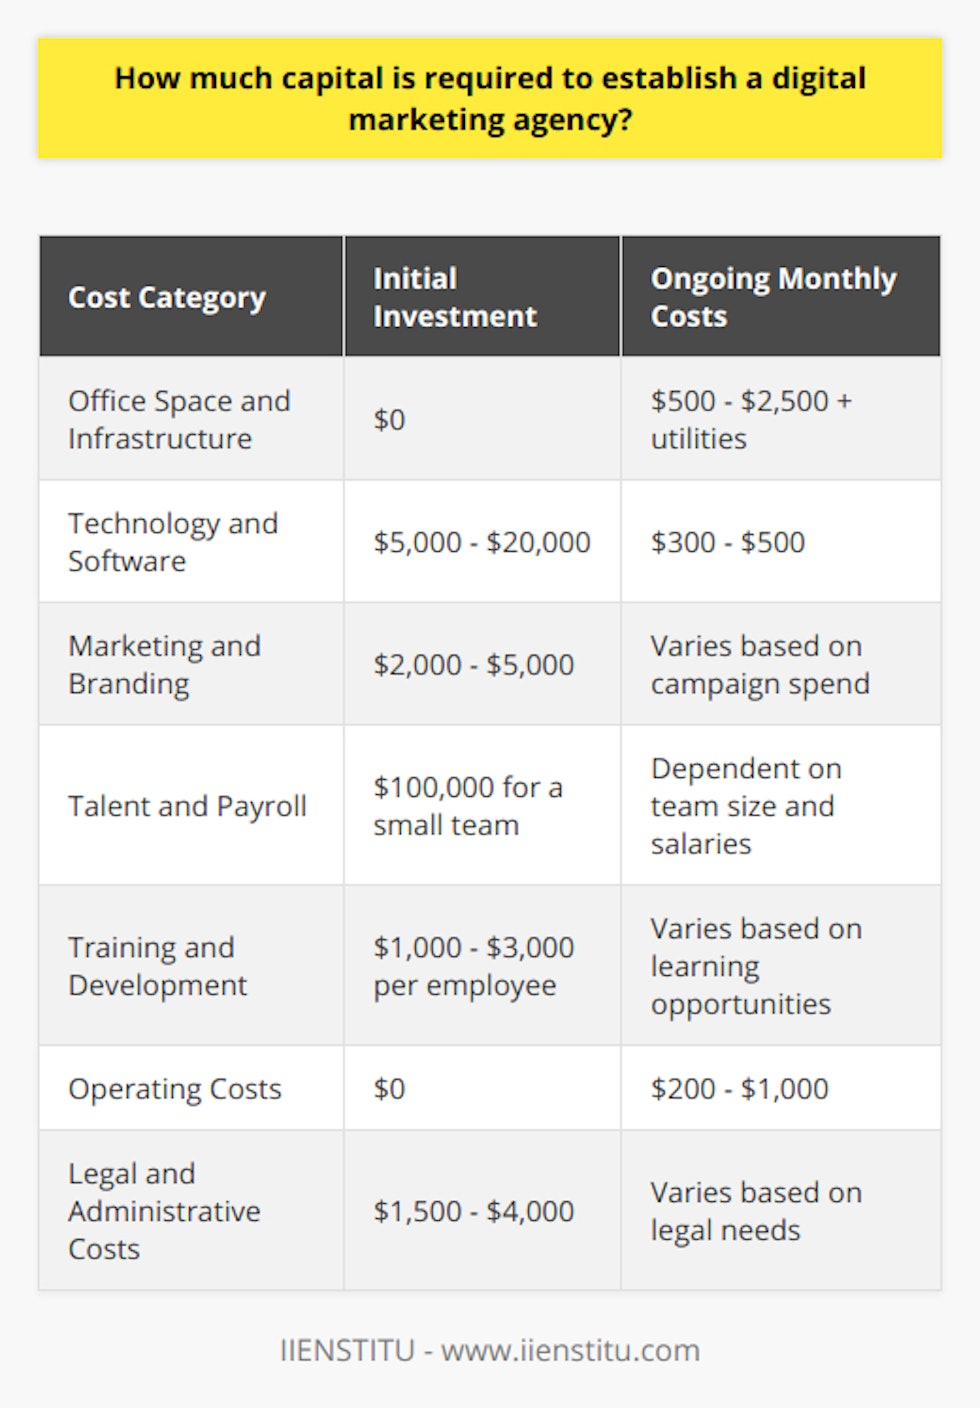 Establishing a digital marketing agency is a dynamic venture that requires a thoughtful investment in several key areas. Here's a breakdown of the primary costs involved in setting up such an agency:1. **Office Space and Infrastructure**: While a digital marketing agency can operate remotely, having a dedicated workspace for collaboration and meetings can be advantageous. Leasing a small office could cost from $500 to $2,500 monthly, depending on location and size, with additional utility fees.2. **Technology and Software**: Crucial investments include computers, tablets, and smartphones. Budgeting for industry-standard software tools for SEO, email marketing, graphic design, and project management is also essential. This could amount to approximately $300 to $500 per month on a subscription basis, while initial hardware setup may require an outlay from $5,000 to $20,000.3. **Marketing and Branding**: Your own marketing is a testament to your capabilities. Initially, invest $2,000 to $5,000 in website creation and development, including SEO, content marketing, and PPC campaigns to attract leads. Ongoing marketing costs should be anticipated for continuous outreach and branding efforts.4. **Talent and Payroll**: A team of qualified professionals for creative, technical, and strategic roles is the backbone of the agency. An entry-level digital marketer's salary might range from $30,000 to $50,000 a year, with senior positions and specialized roles demanding higher salaries. Plan to set aside at least $100,000 for the first year if hiring a small team.5. **Training and Development**: Knowledge is pivotal in digital marketing. Allocating around $1,000 to $3,000 annually per employee for attending webinars, courses, and conferences -- such as those provided by IIENSTITU -- ensures the team remains at the forefront of industry trends.6. **Operating Costs**: These include recurring expenses such as internet bills, cloud storage, phone lines, and office supplies, which can range from $200 to $1,000 monthly.7. **Legal and Administrative Costs**: Registering the business, obtaining licenses, and having solid contracts and legal support might cost from $1,500 to $4,000 upfront.Therefore, the ballpark figure for establishing a moderately outfitted digital marketing agency might range from $65,000 to $150,000. This encompasses a lean team, initial marketing push, essential technology and software, and compliance with legal requirements. These estimates can vary widely depending on the scale, location, and ambition of the agency. Consequently, a well-structured business plan and careful financial management are paramount for a successful launch and sustained growth in the competitive landscape of digital marketing.